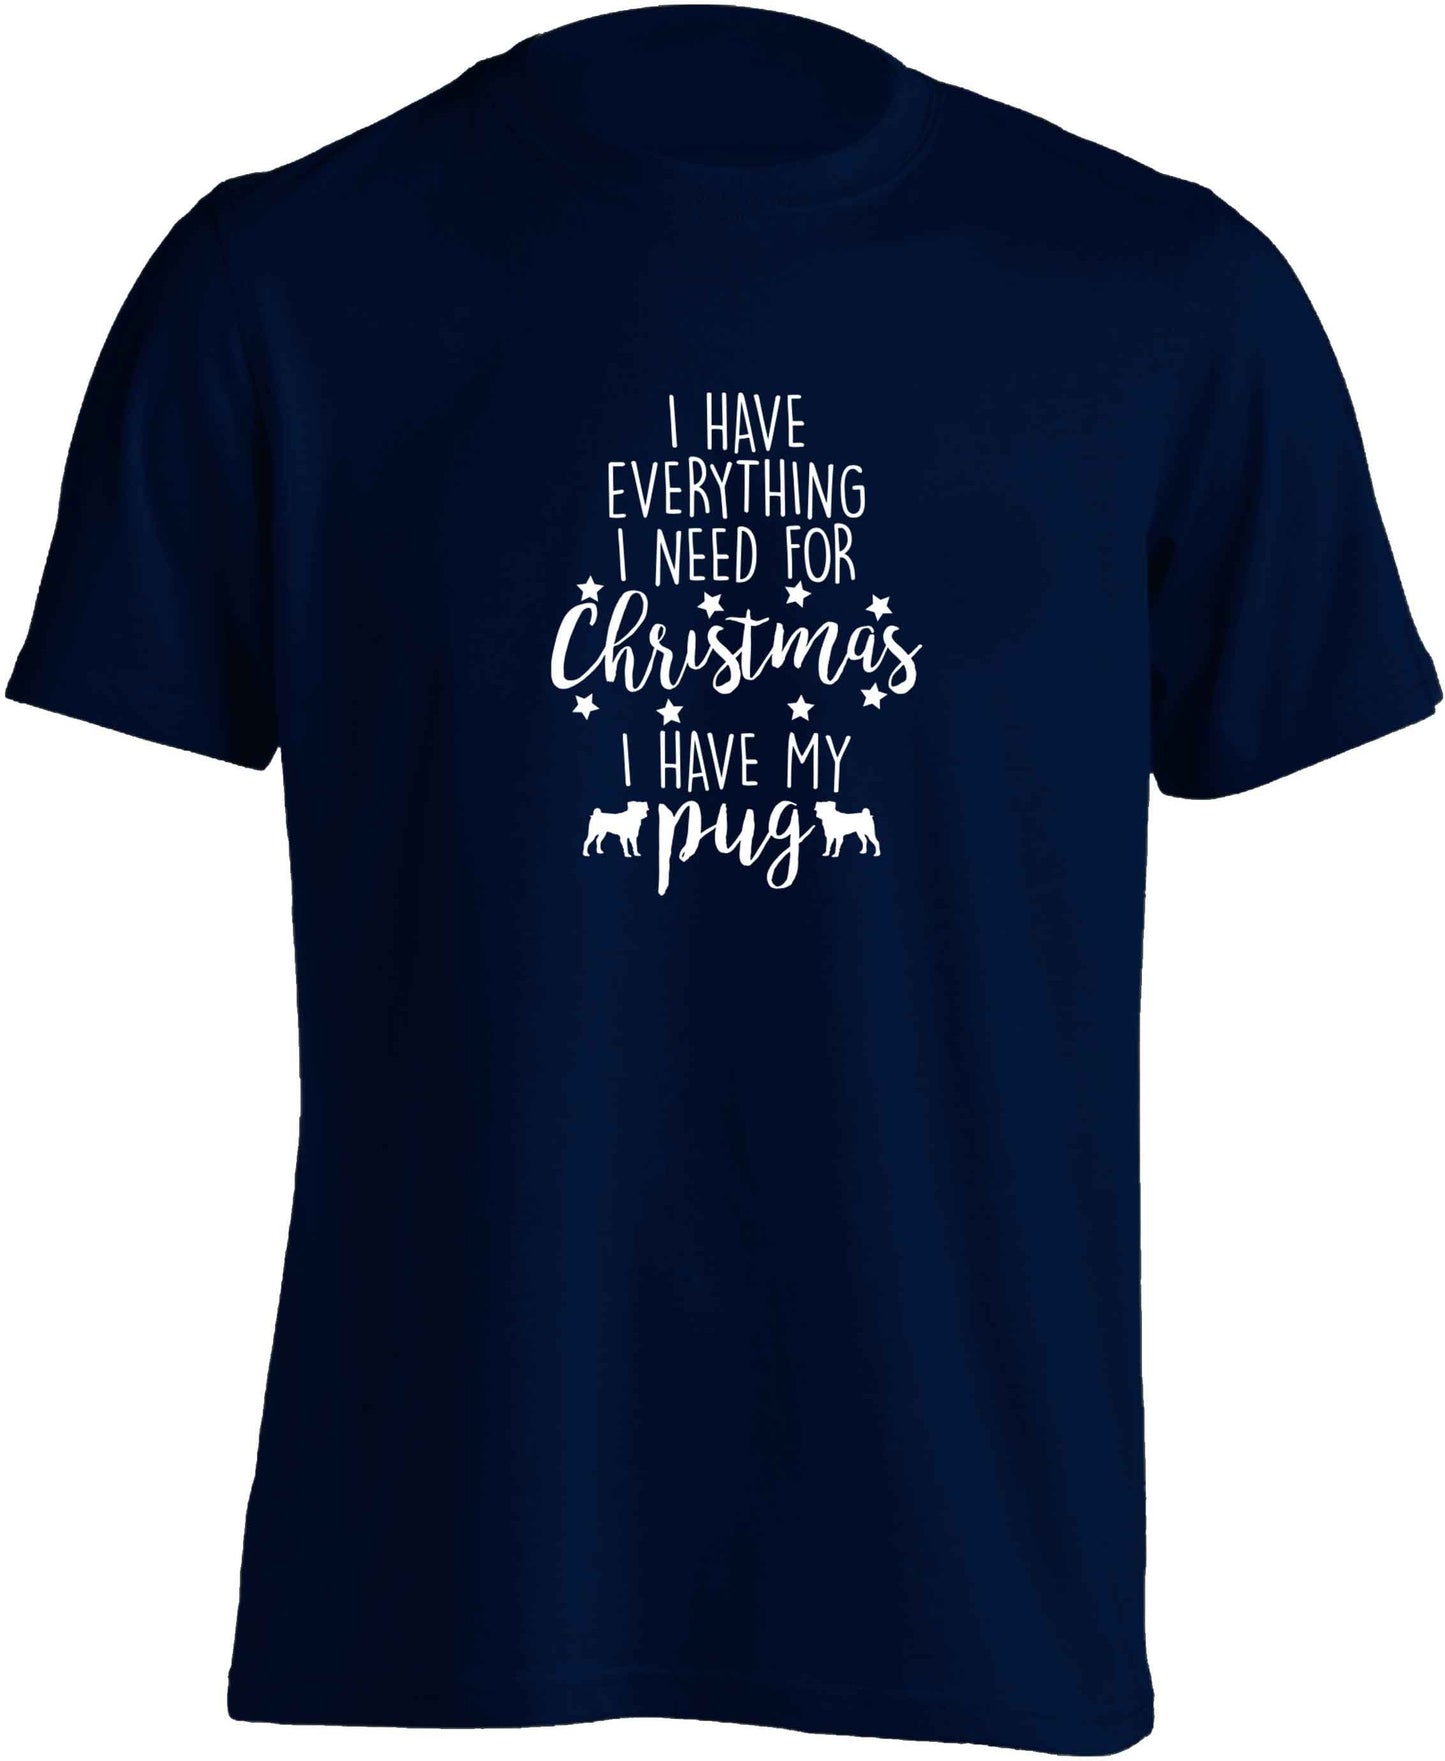 I have everything I need for Christmas I have my pug adults unisex navy Tshirt 2XL